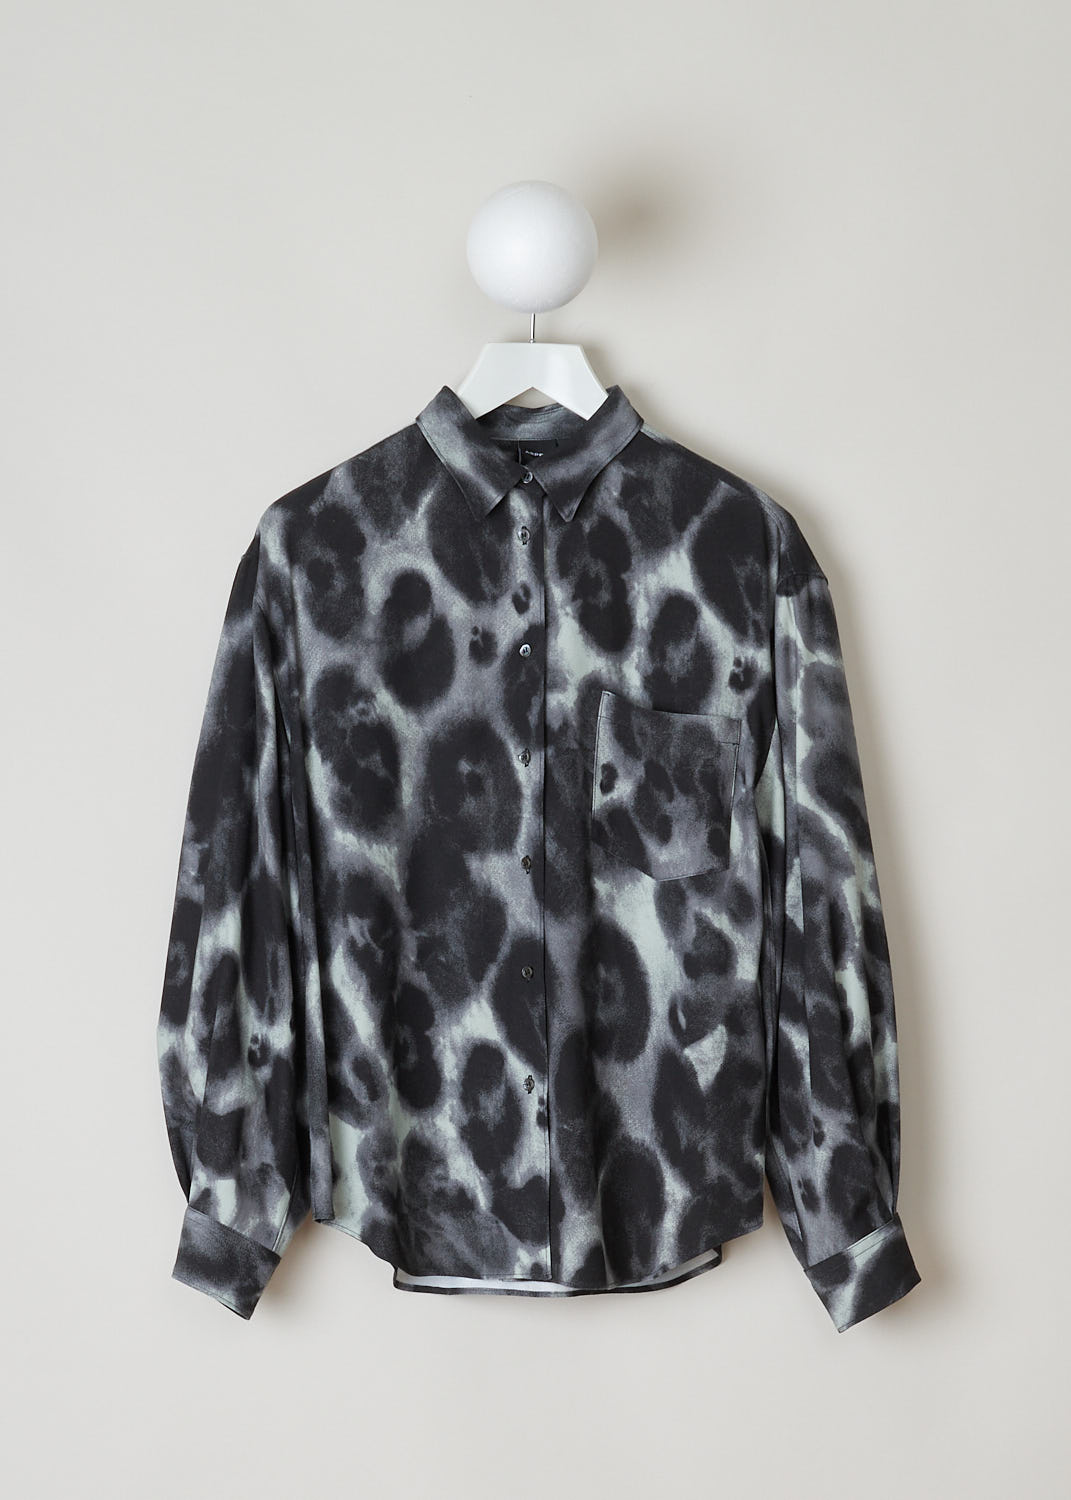 ASPESI, FADED ANIMAL PRINT BLOUSE, 5427_V129_02189, Grey, Print, Front, This long sleeved blouse features a faded animal print. The blouse has a classic collar, a single breast pocket, front button closure and a rounded hemline.
